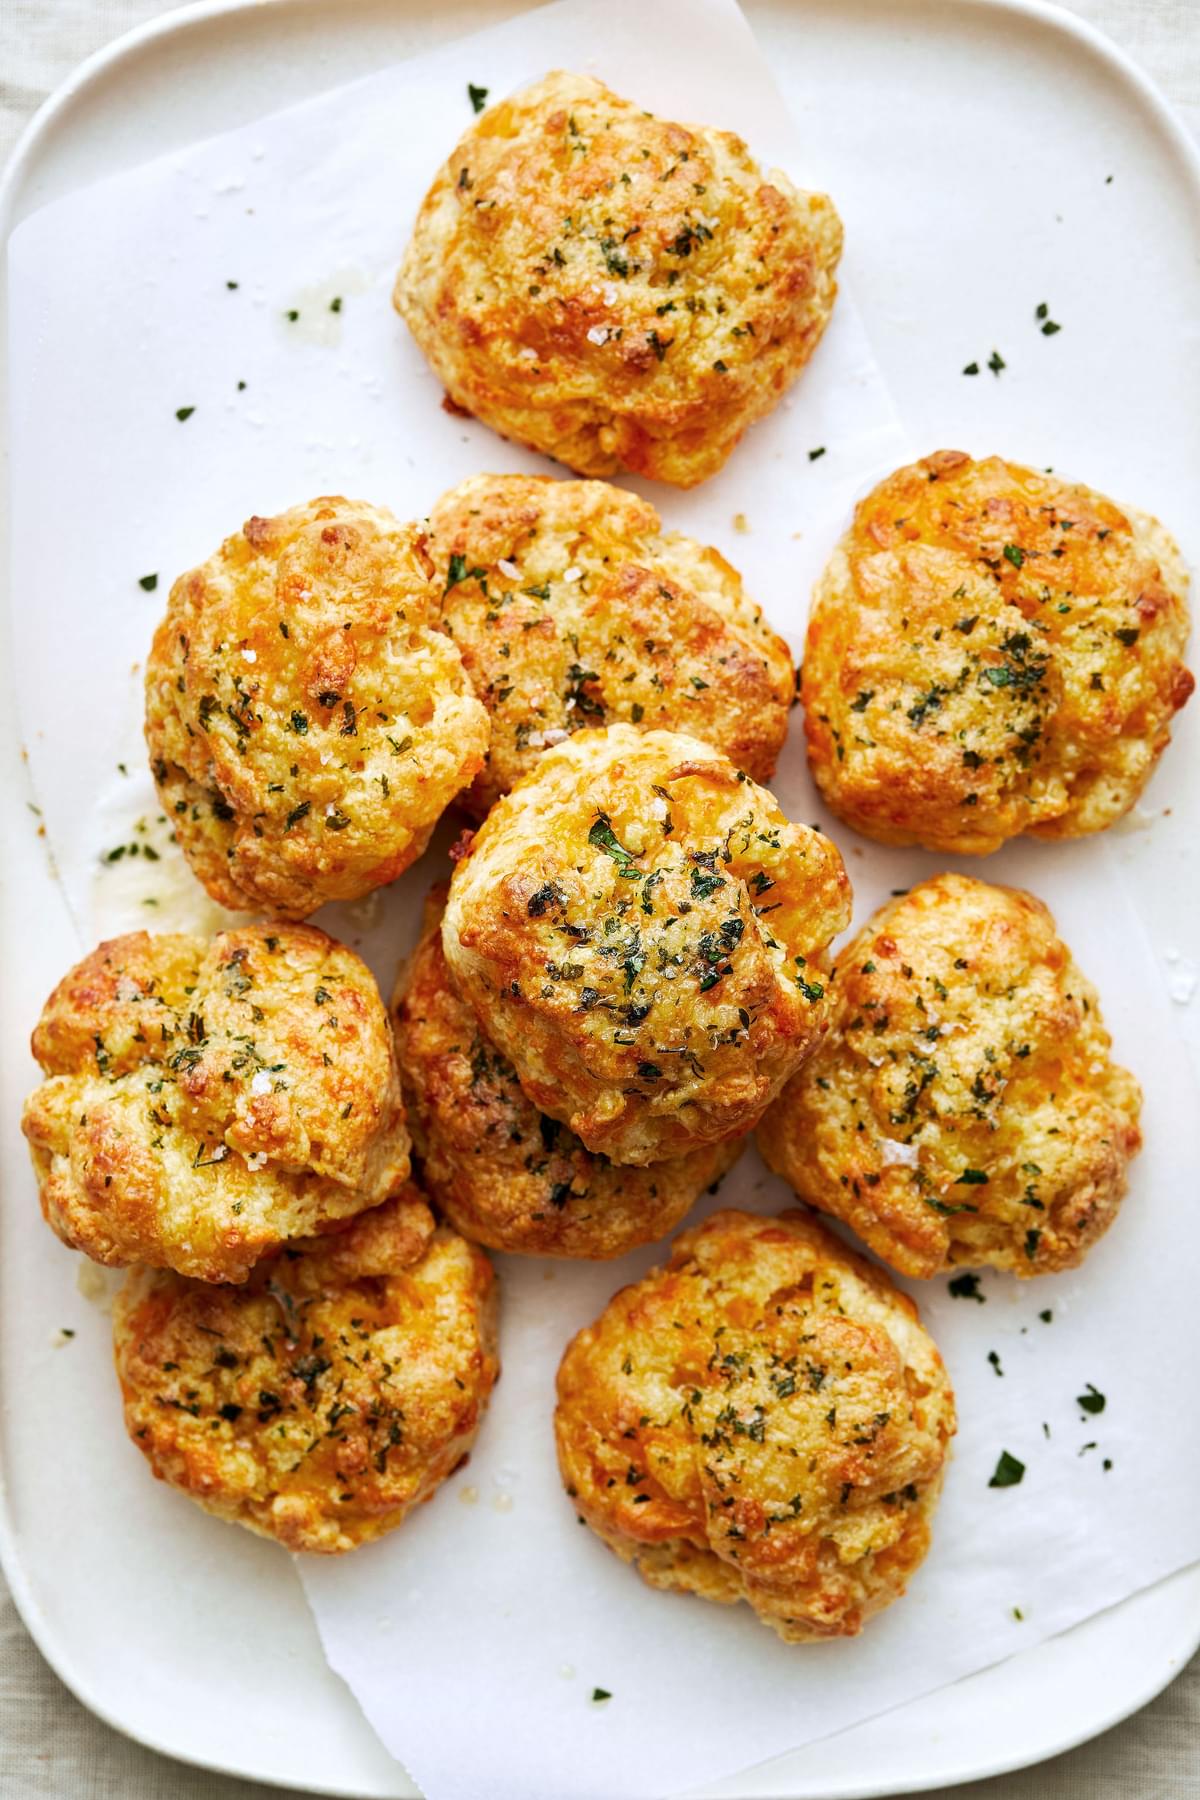 homemade red lobster cheddar bay biscuits topped with melted butter and spices (salt, onion, garlic and parsley) on a plate